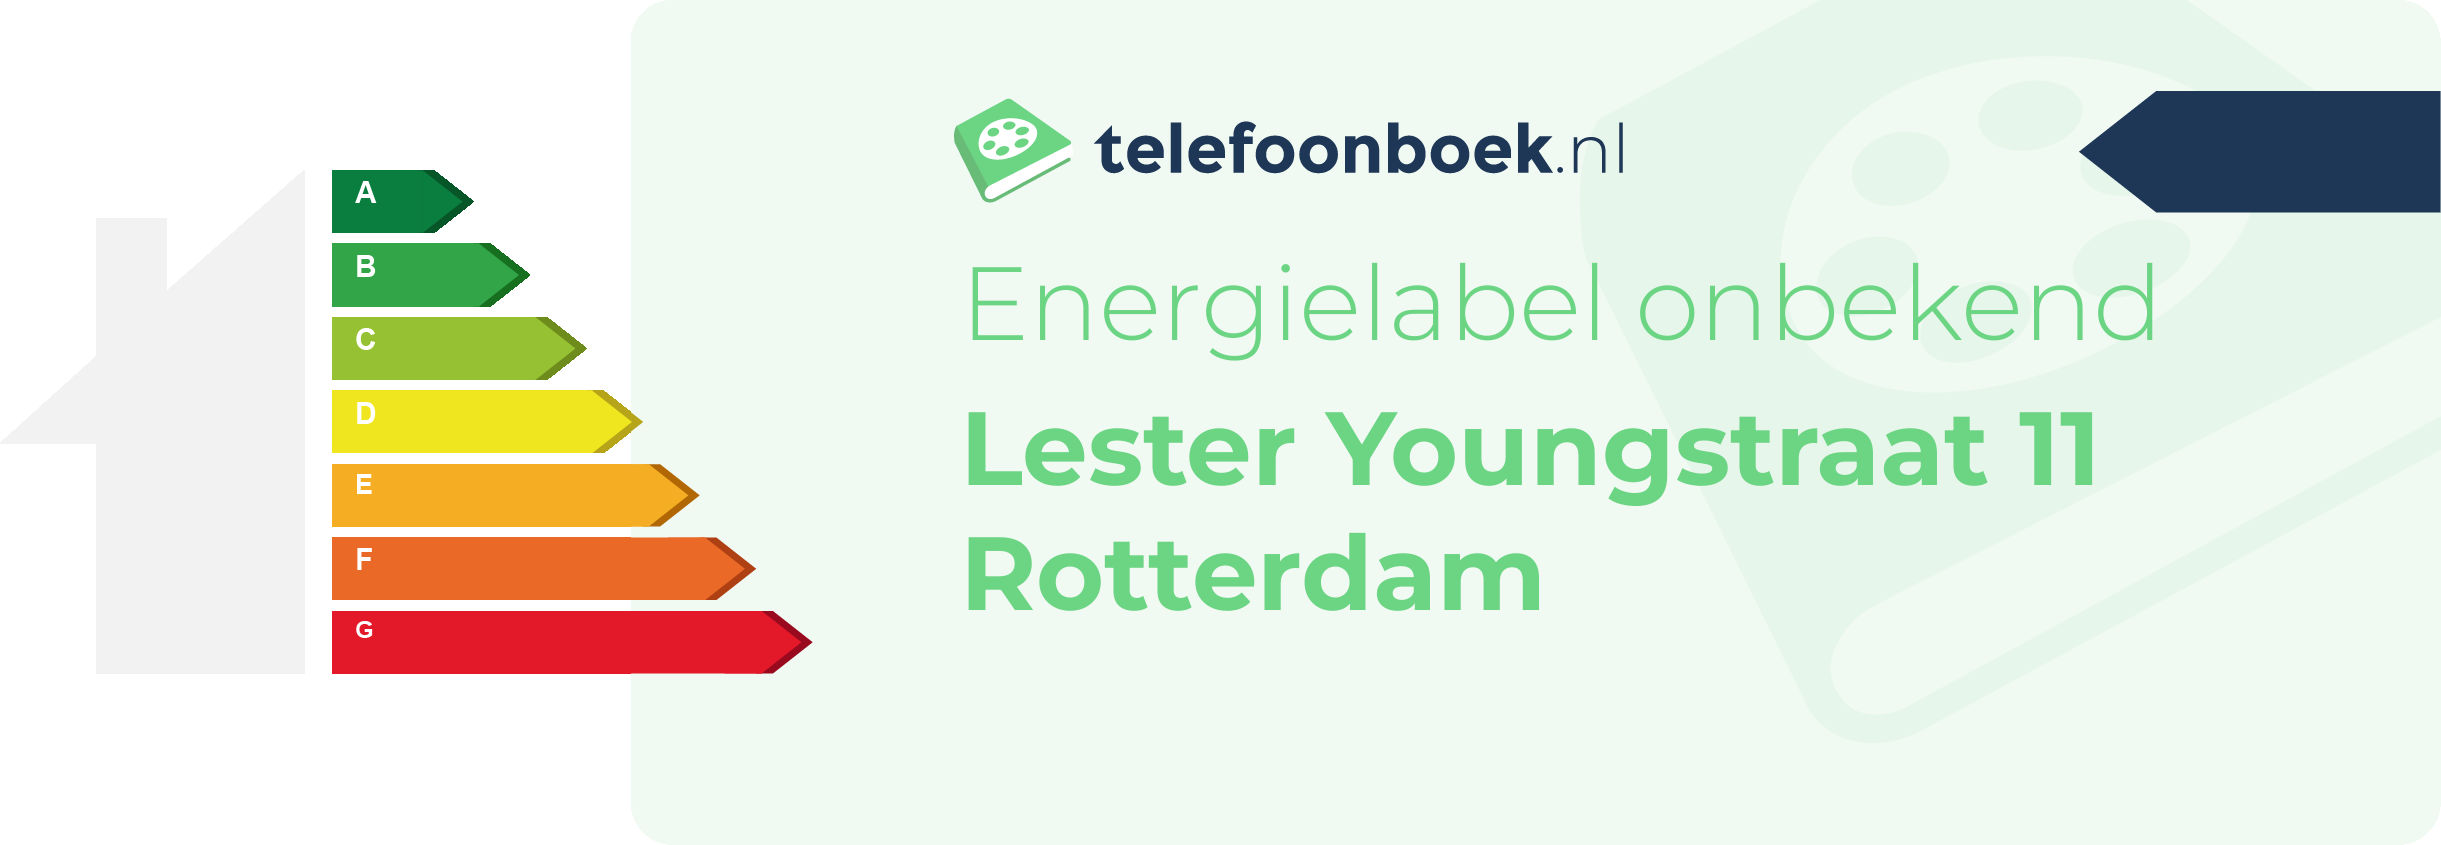 Energielabel Lester Youngstraat 11 Rotterdam